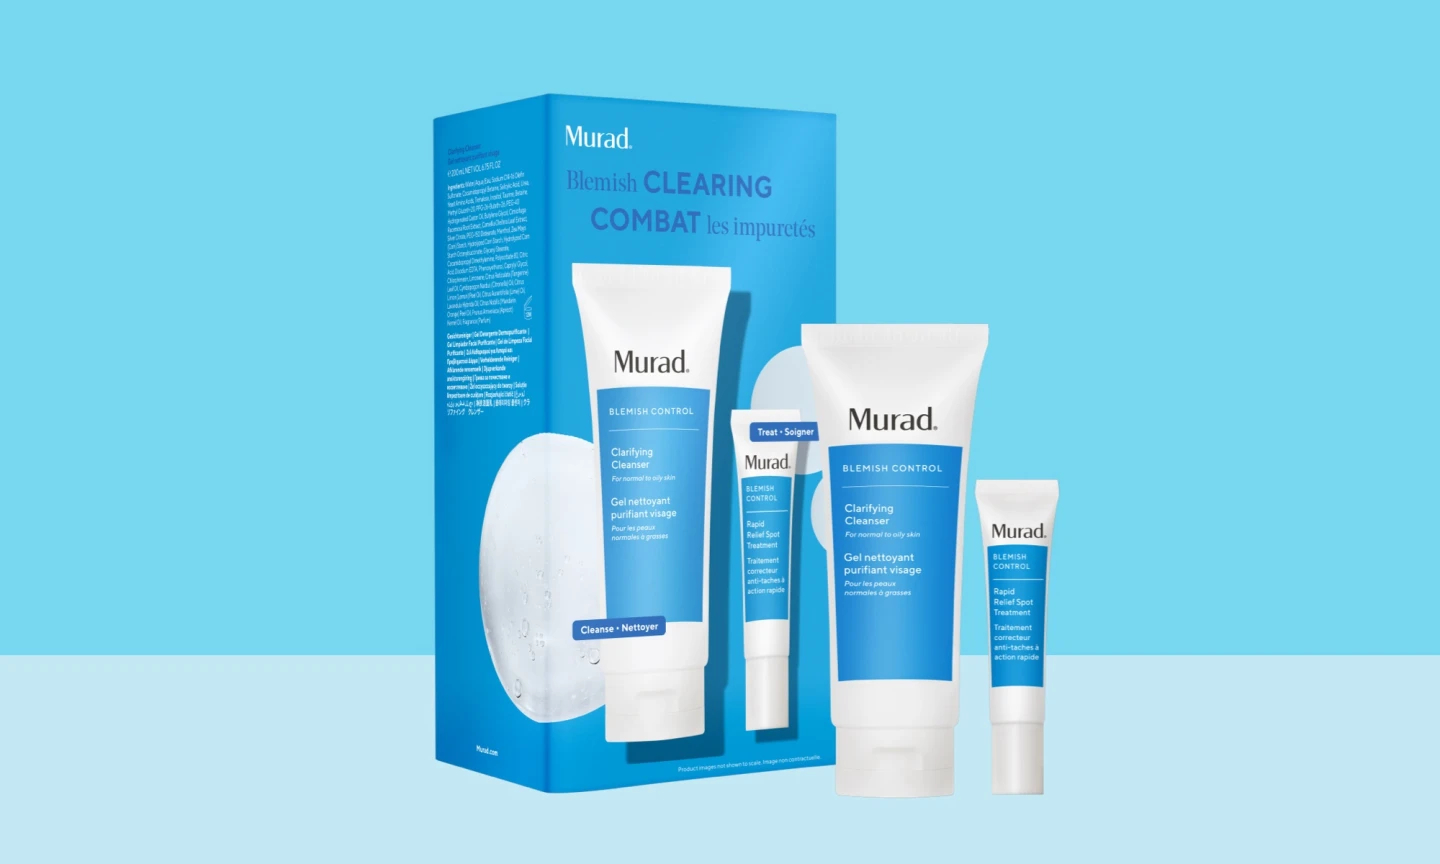 Free Blemish Clearing Value Set when you spend £60 at Murad